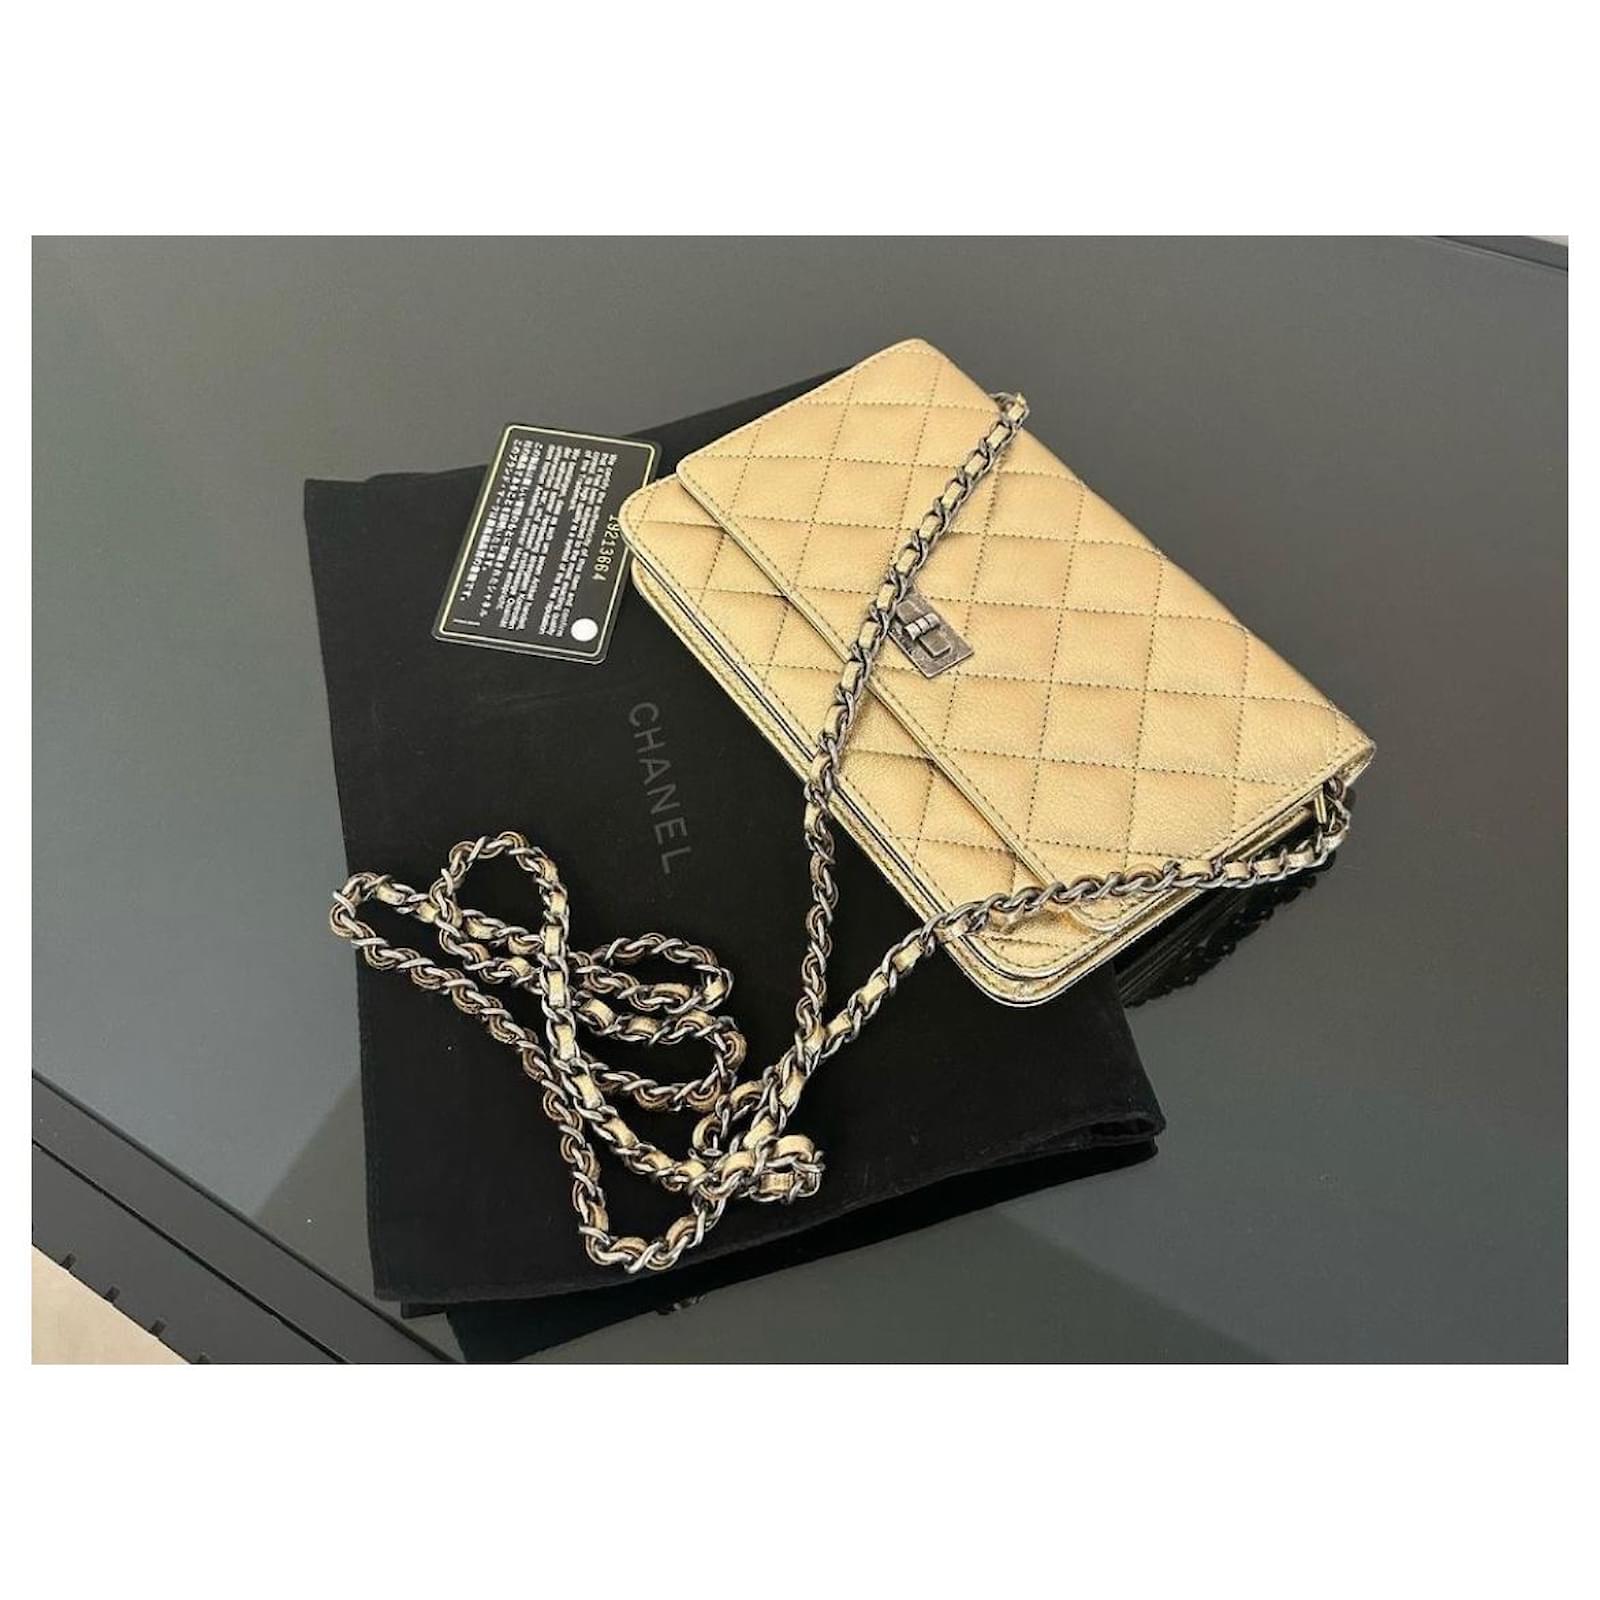 Chanel Reissue 2.55 Wallet on Chain Quilted Aged Calfskin Black 86882104